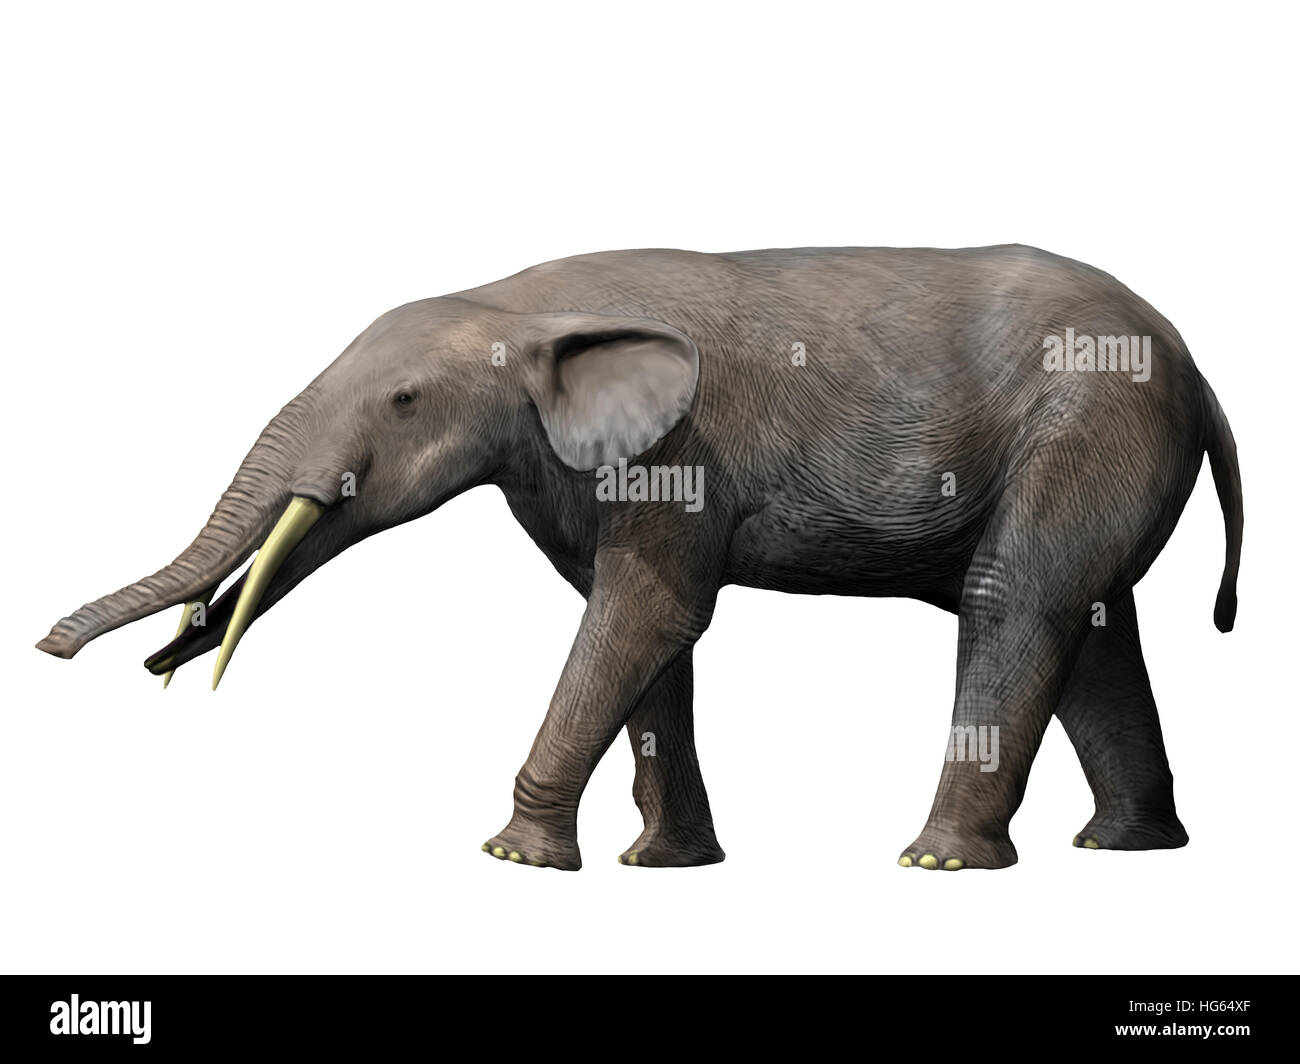 Gomphotherium angustidens from the Miocene epoch of Europe. Stock Photo